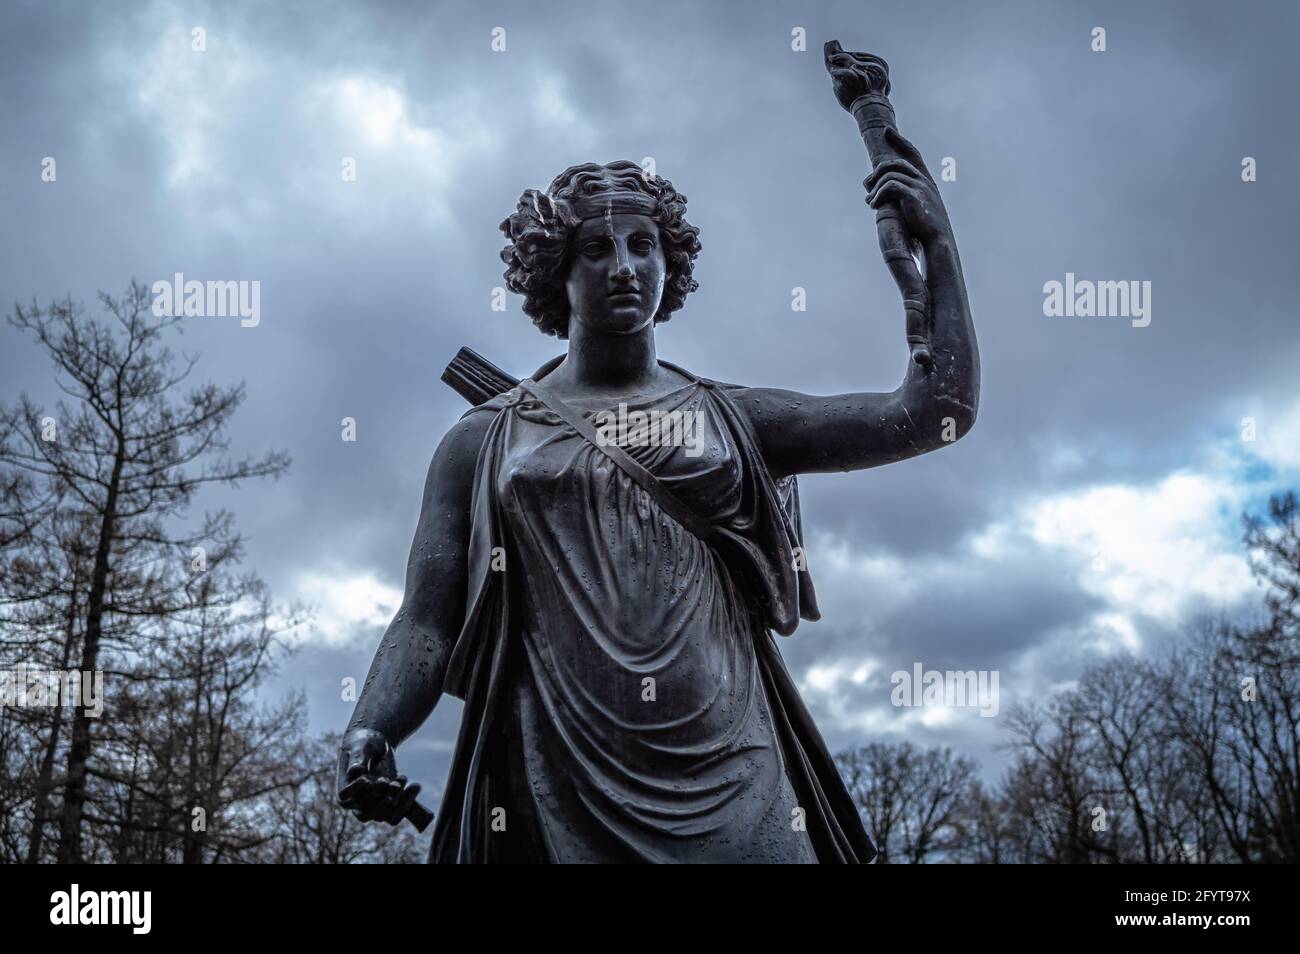 Copper monument to Artemis in the city of Pushkin (Tsarskoye Selo), Russia. Greek goddess of the hunt, the wilderness, wild animals, and the Moon. Stock Photo